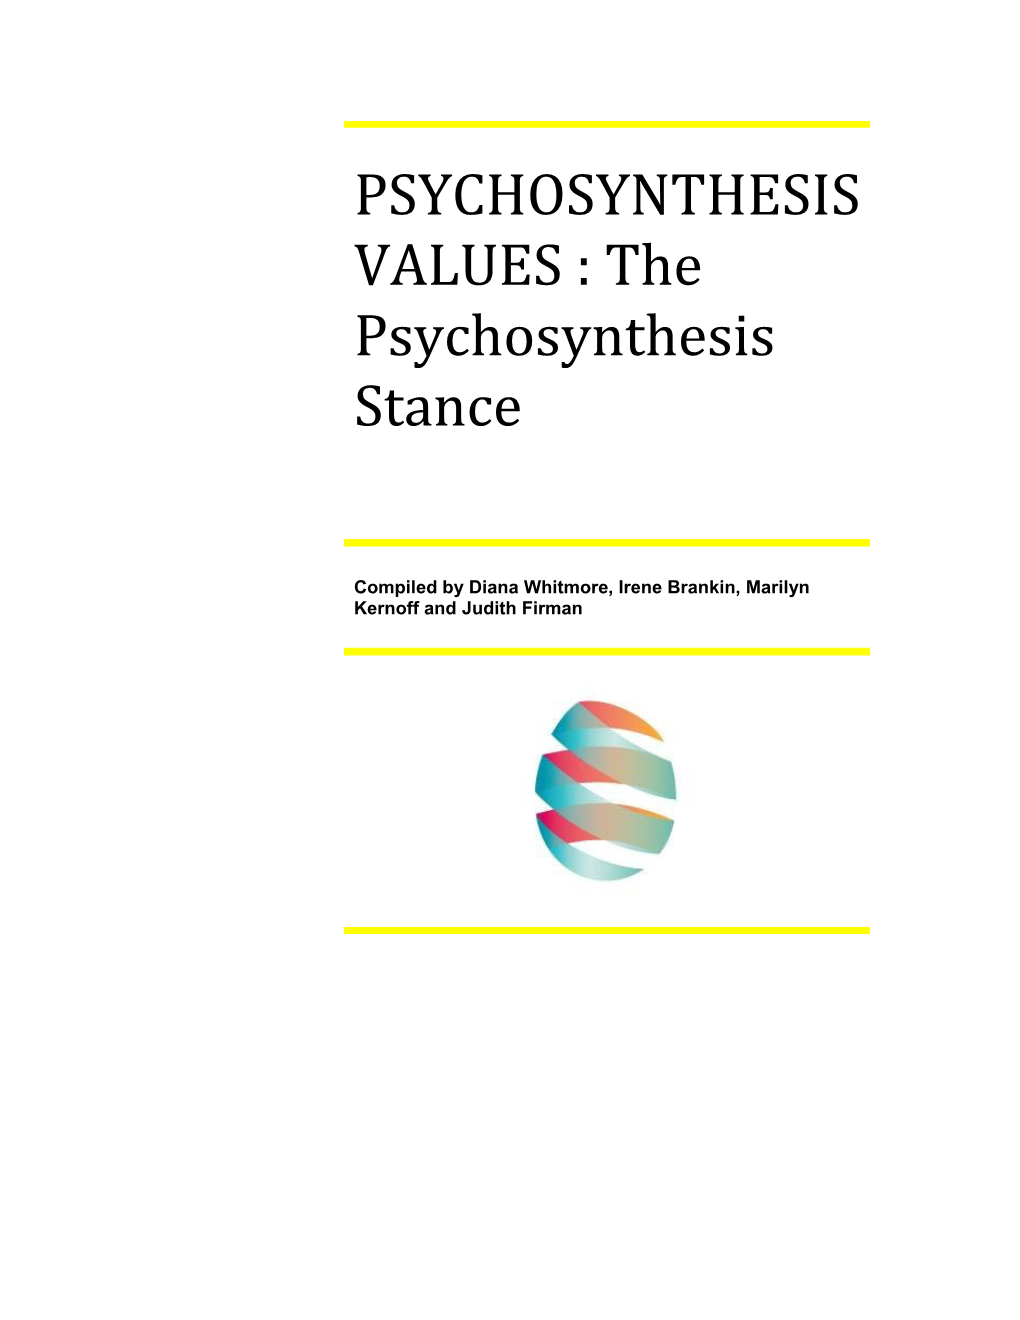 This Is a Collection of Some of the Core Values of Psychosynthesis That Can Inform The